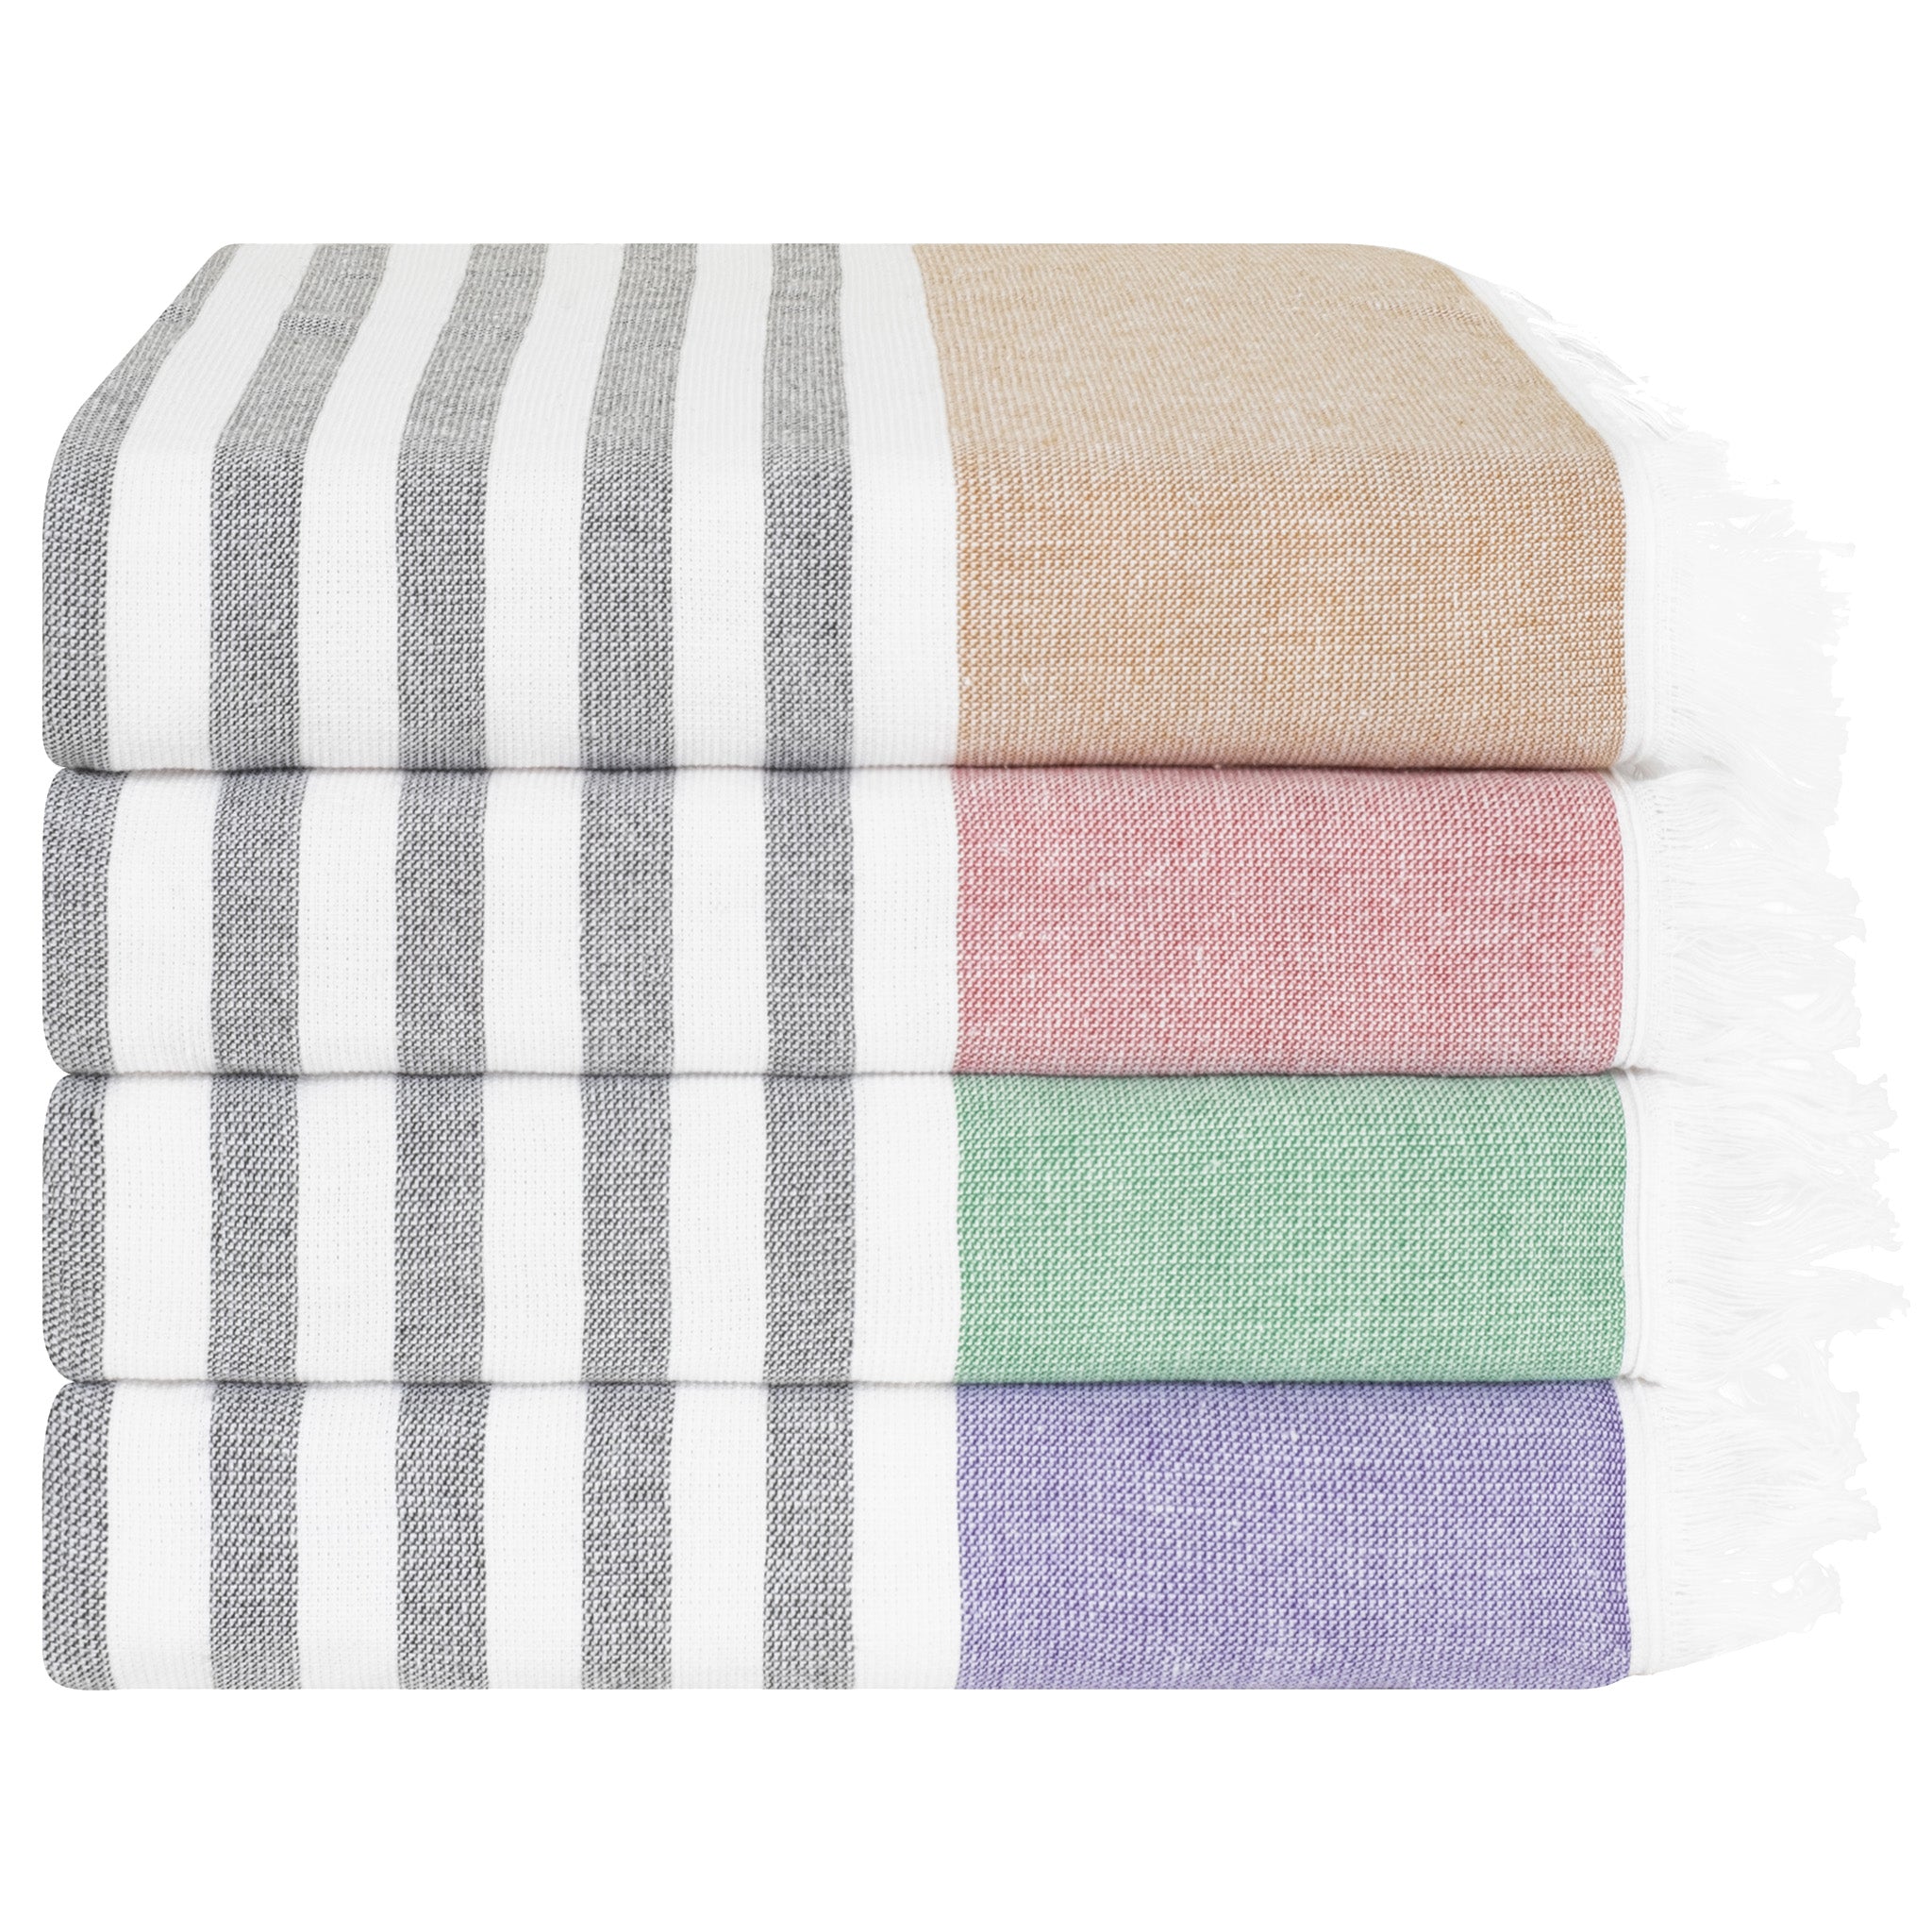 4 Packed 100% Cotton Terry Peshtemal & Beach Towel Mixed Color-01